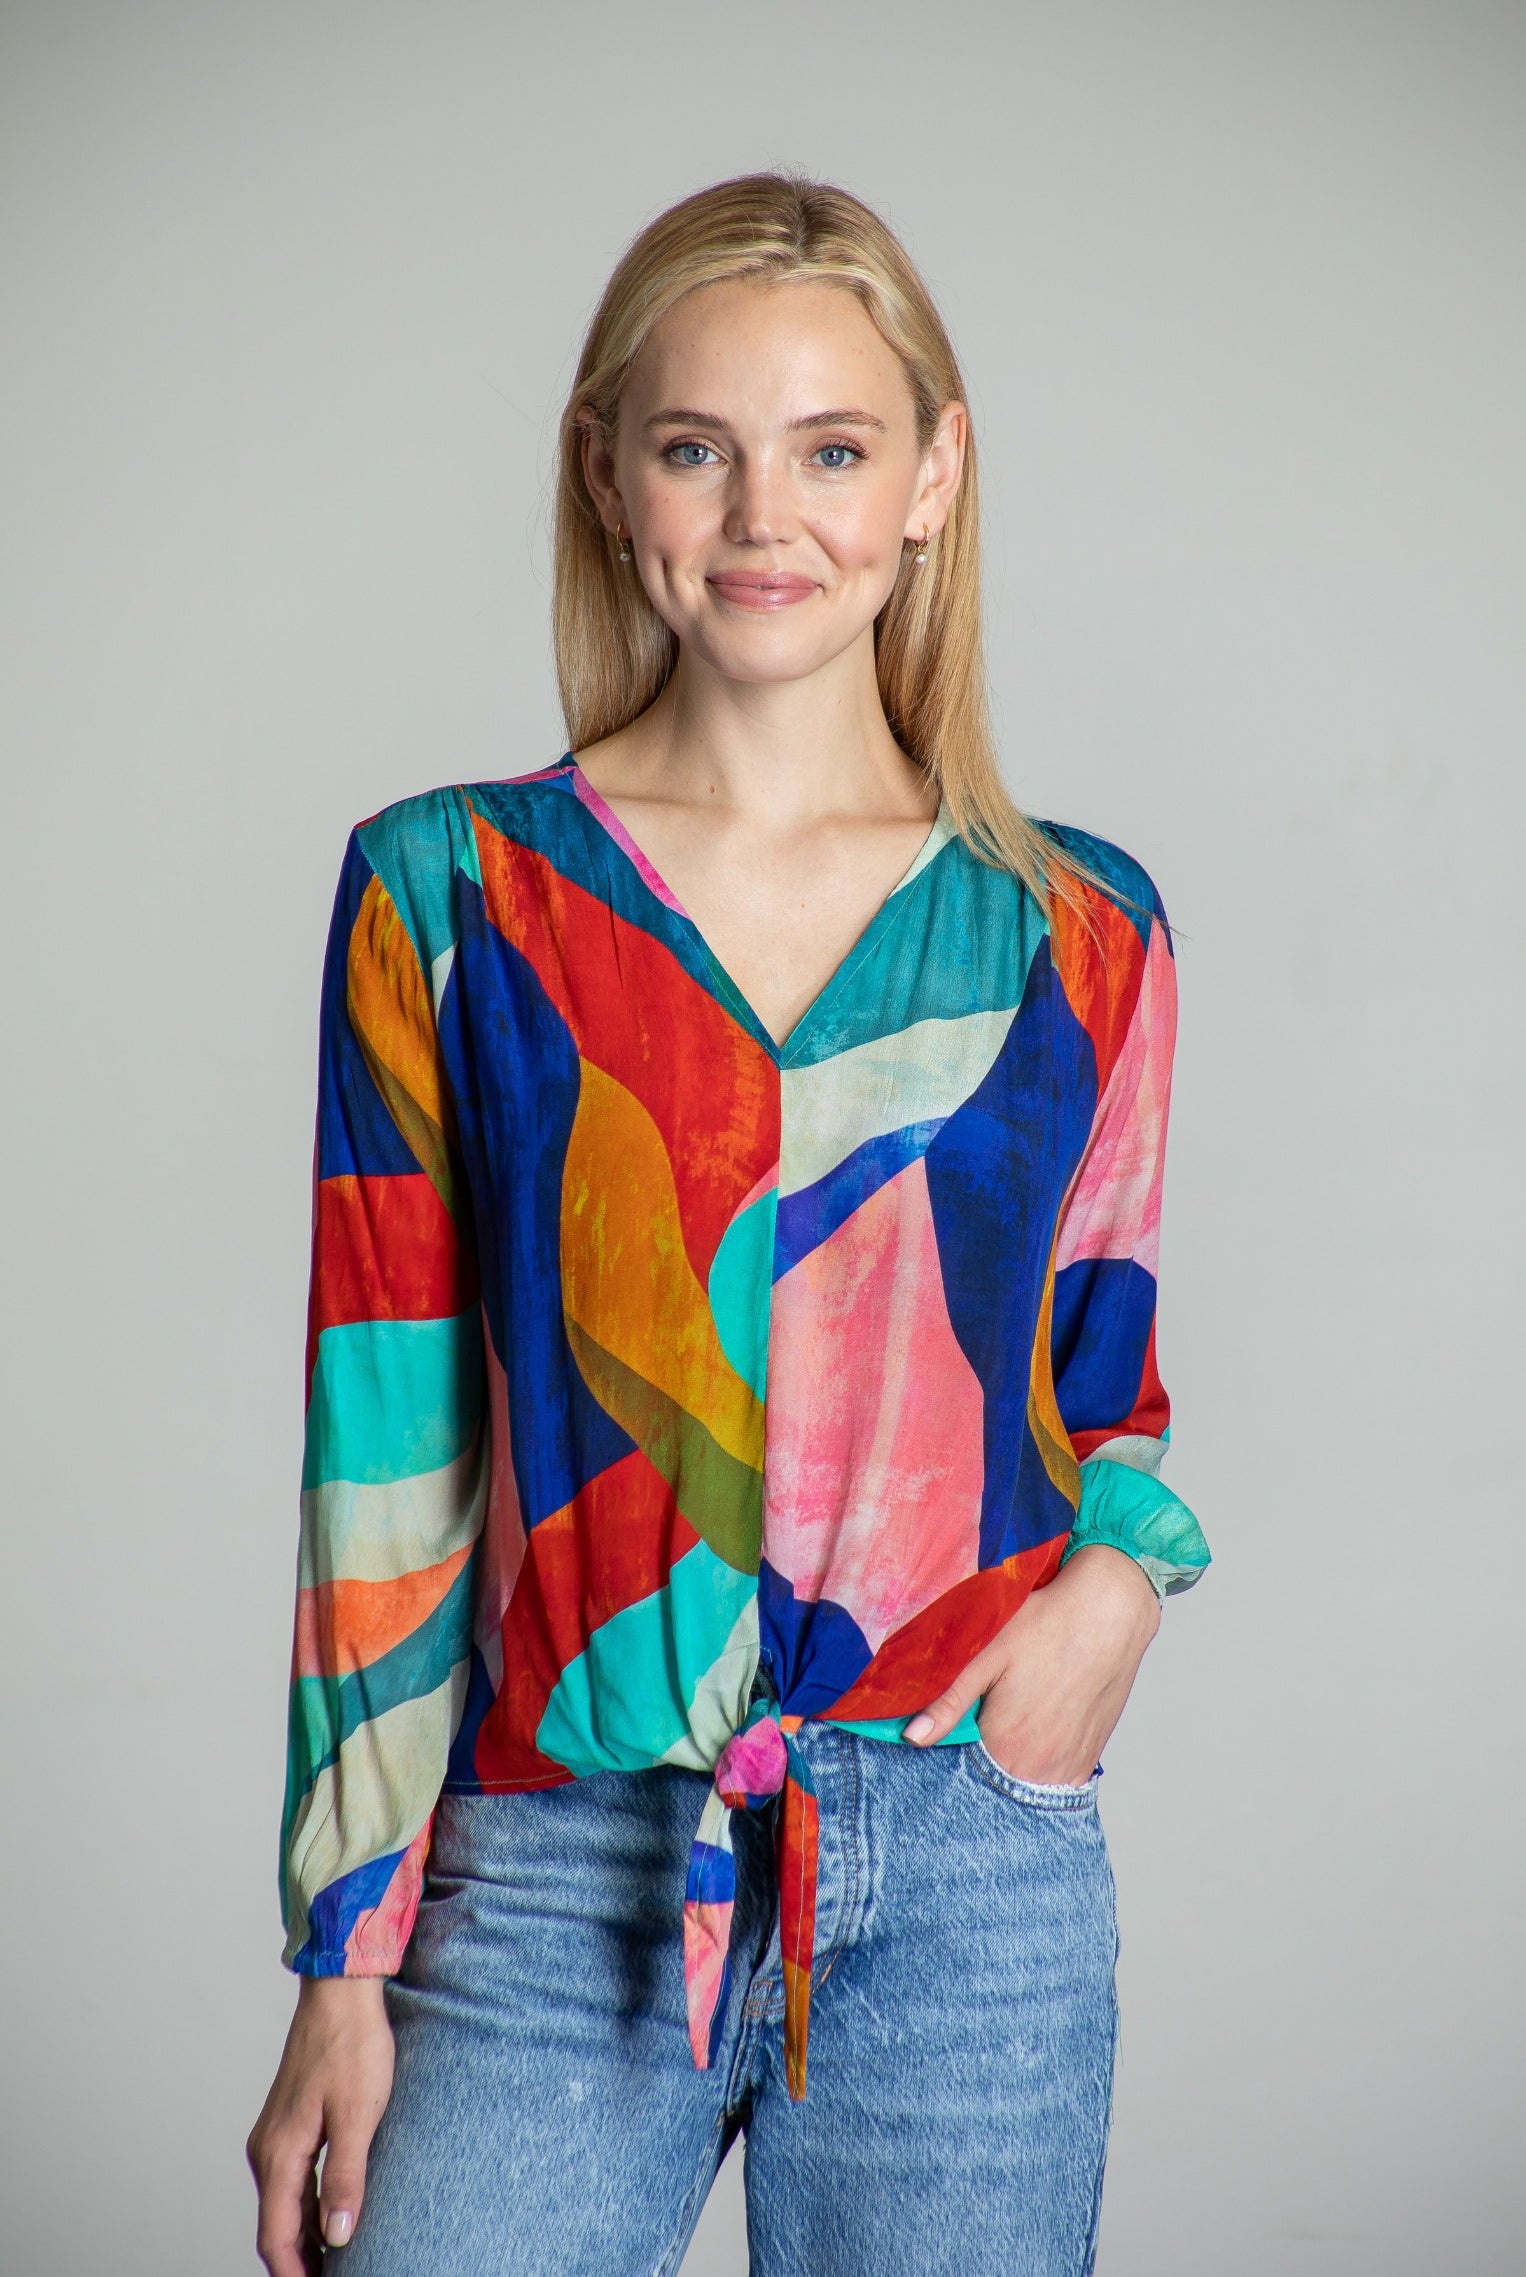 Seabreeze, Floral Embroidered Sleeve Top